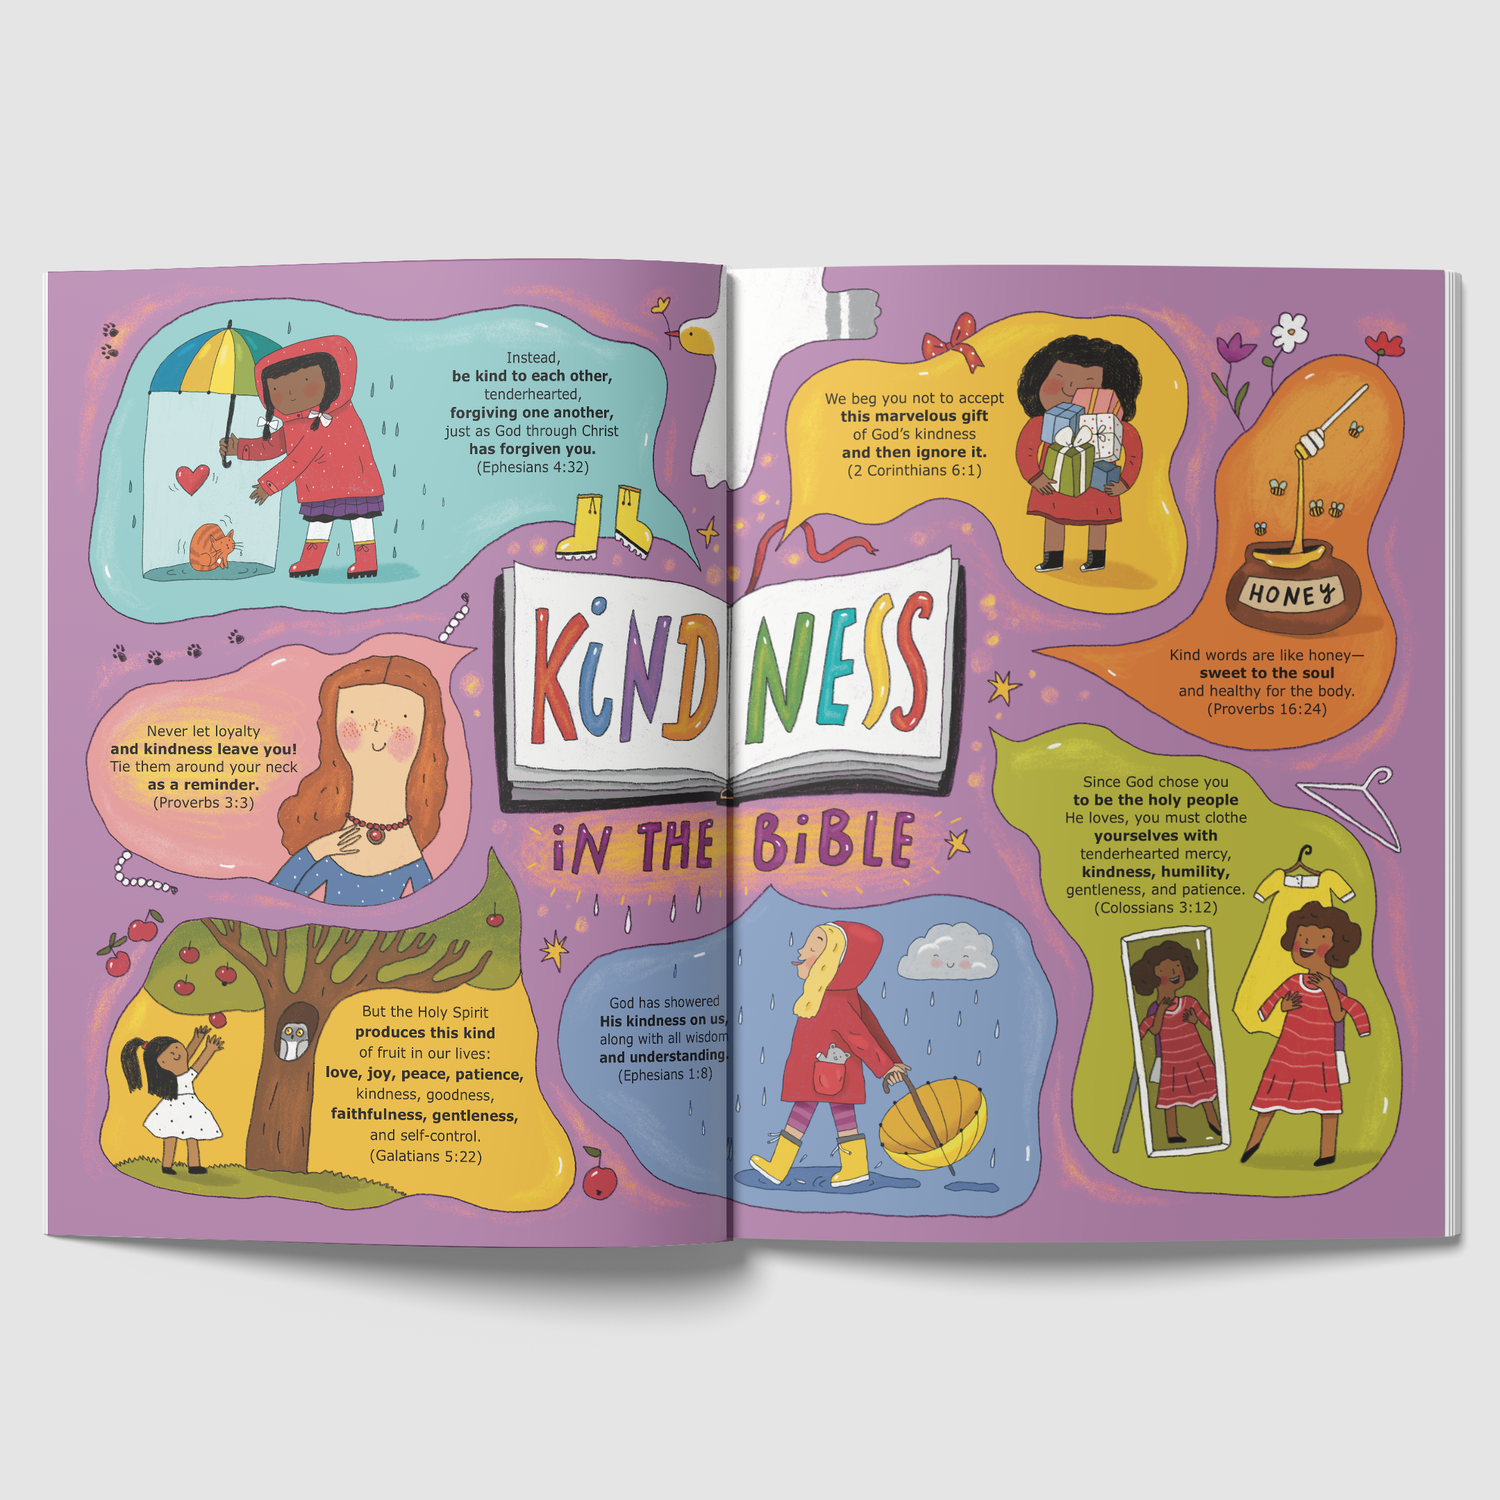 What's for Dinner? The Kindness Issue